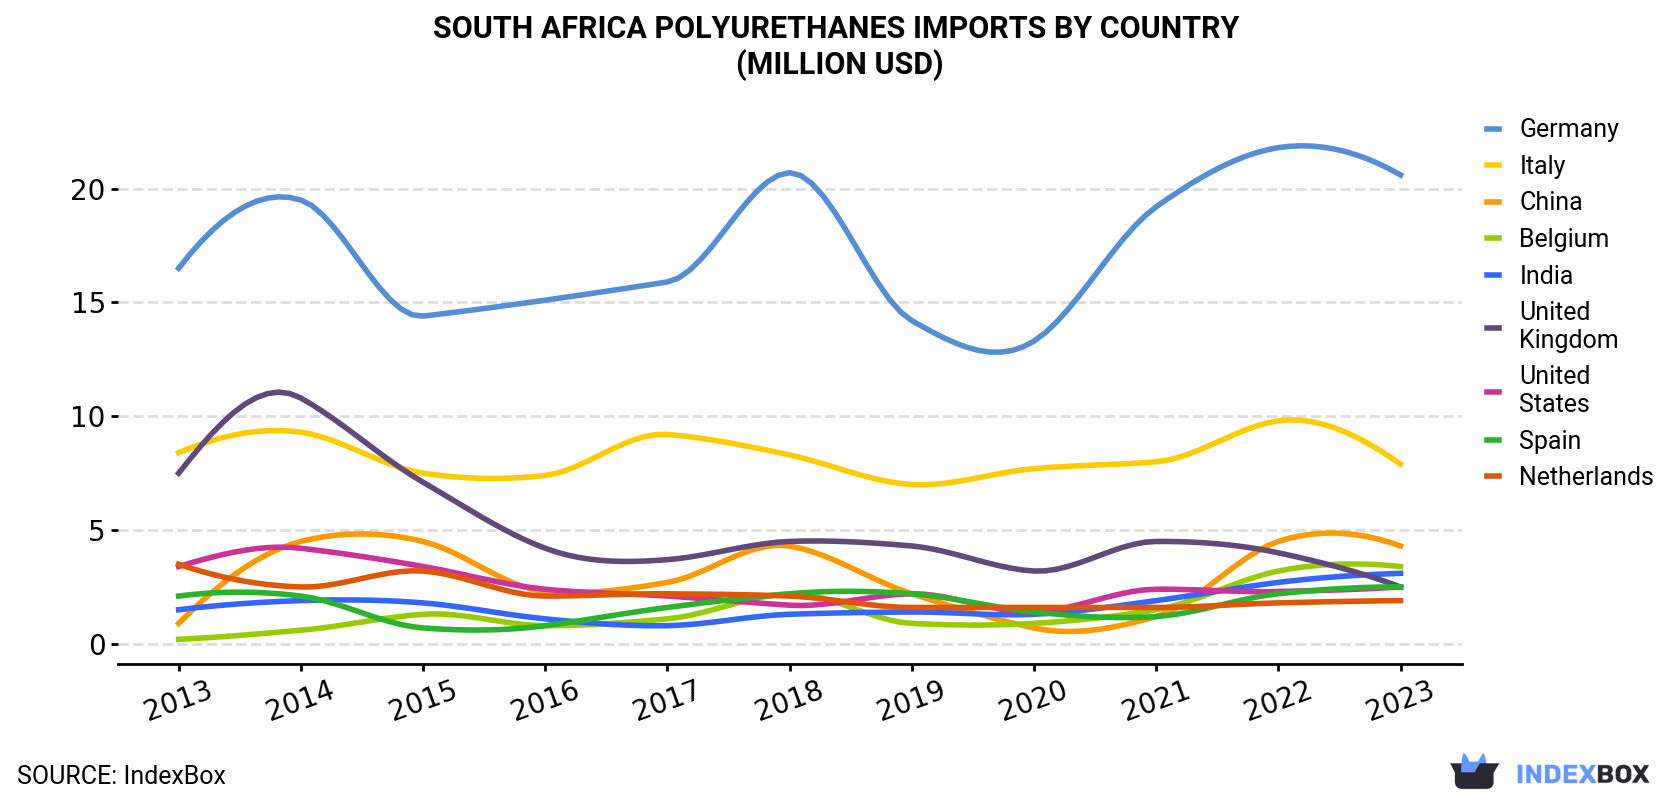 South Africa Polyurethanes Imports By Country (Million USD)